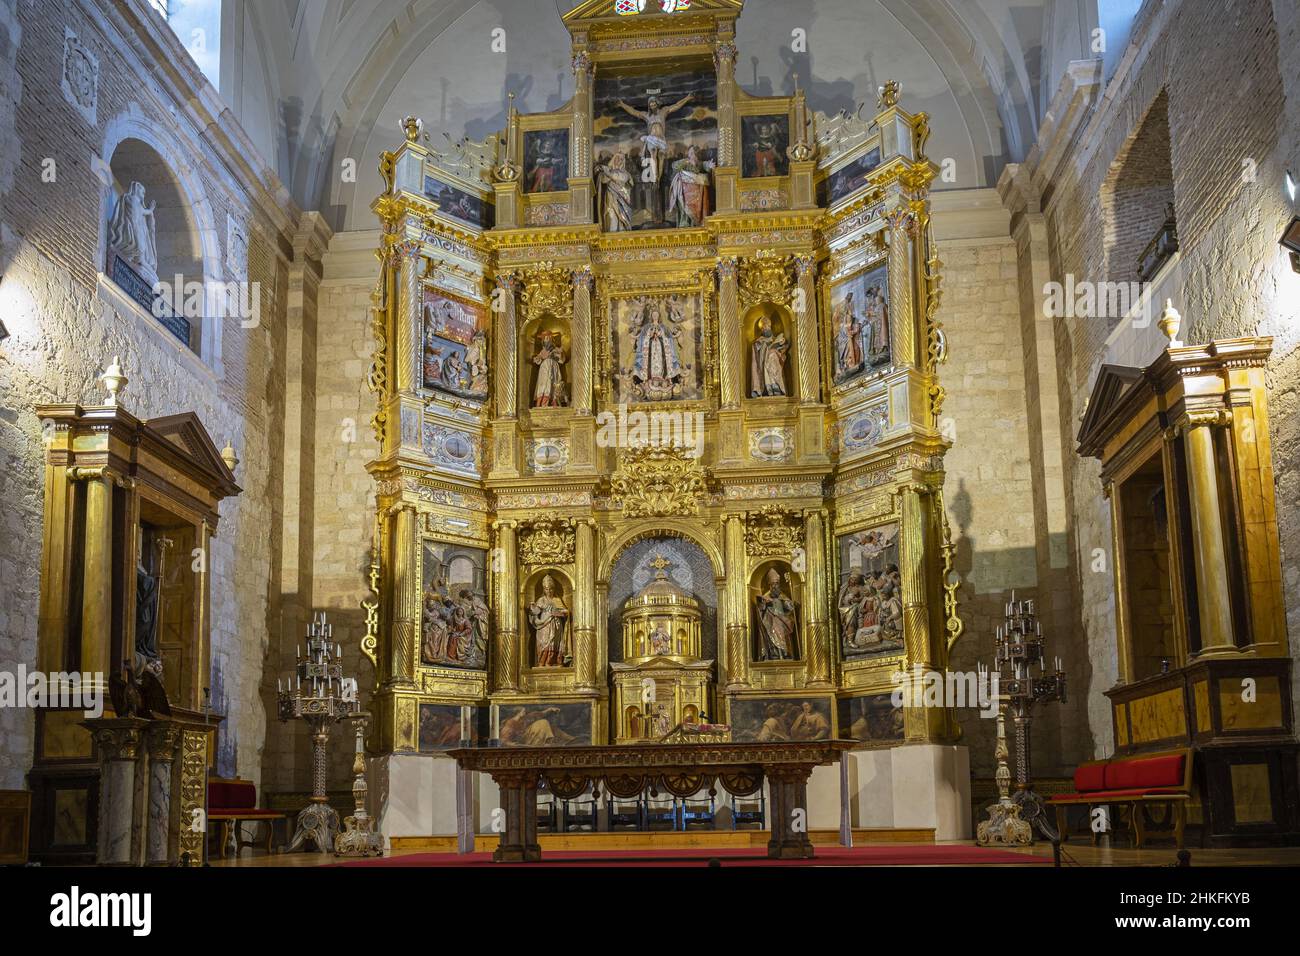 Spain, Castile and León, La Meseta, Carrion de los Condes, stage on the Camino Francés, Spanish route of the pilgrimage to Santiago de Compostela, listed as a UNESCO World Heritage Site, San Zoilo Cluniac monastery founded in the 10th century, major altarpiece Stock Photo